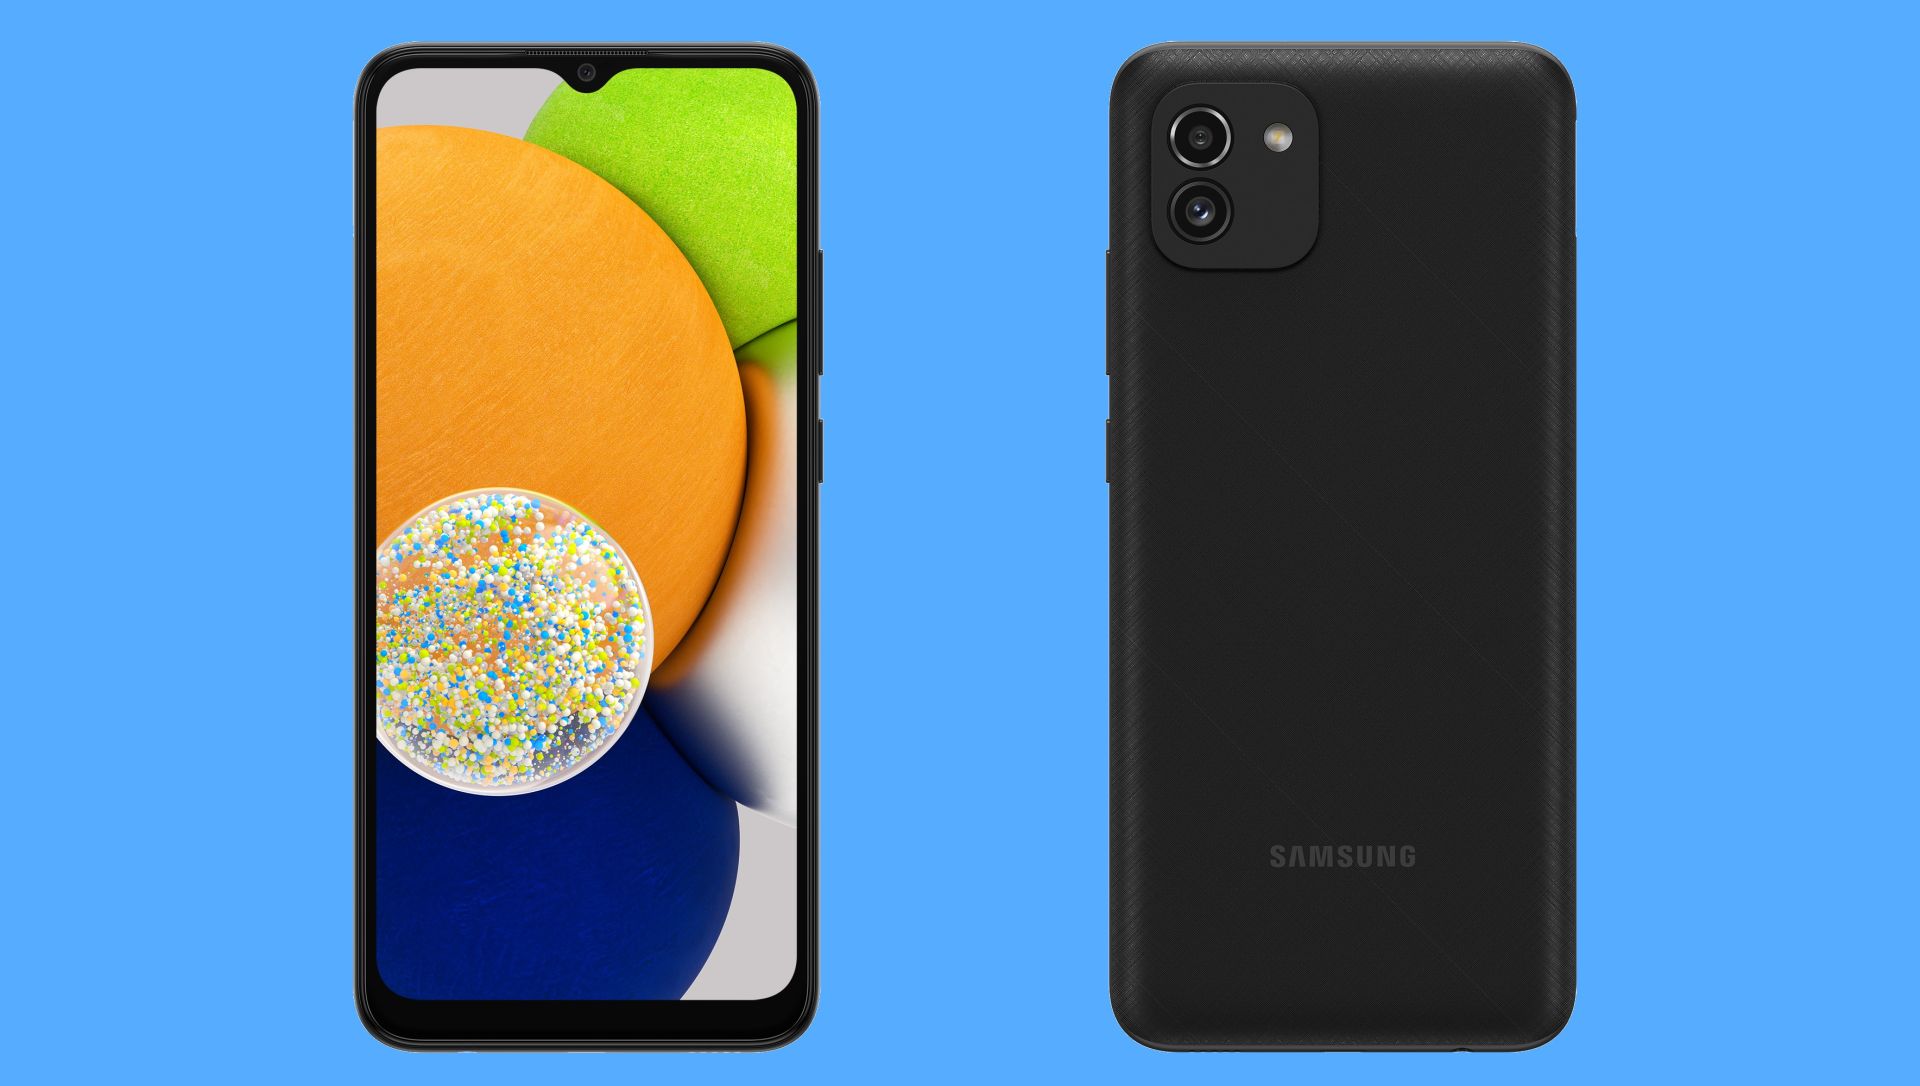 The Galaxy A03 is Samsung's first phone of 2022, set to make a big appearance one week from now